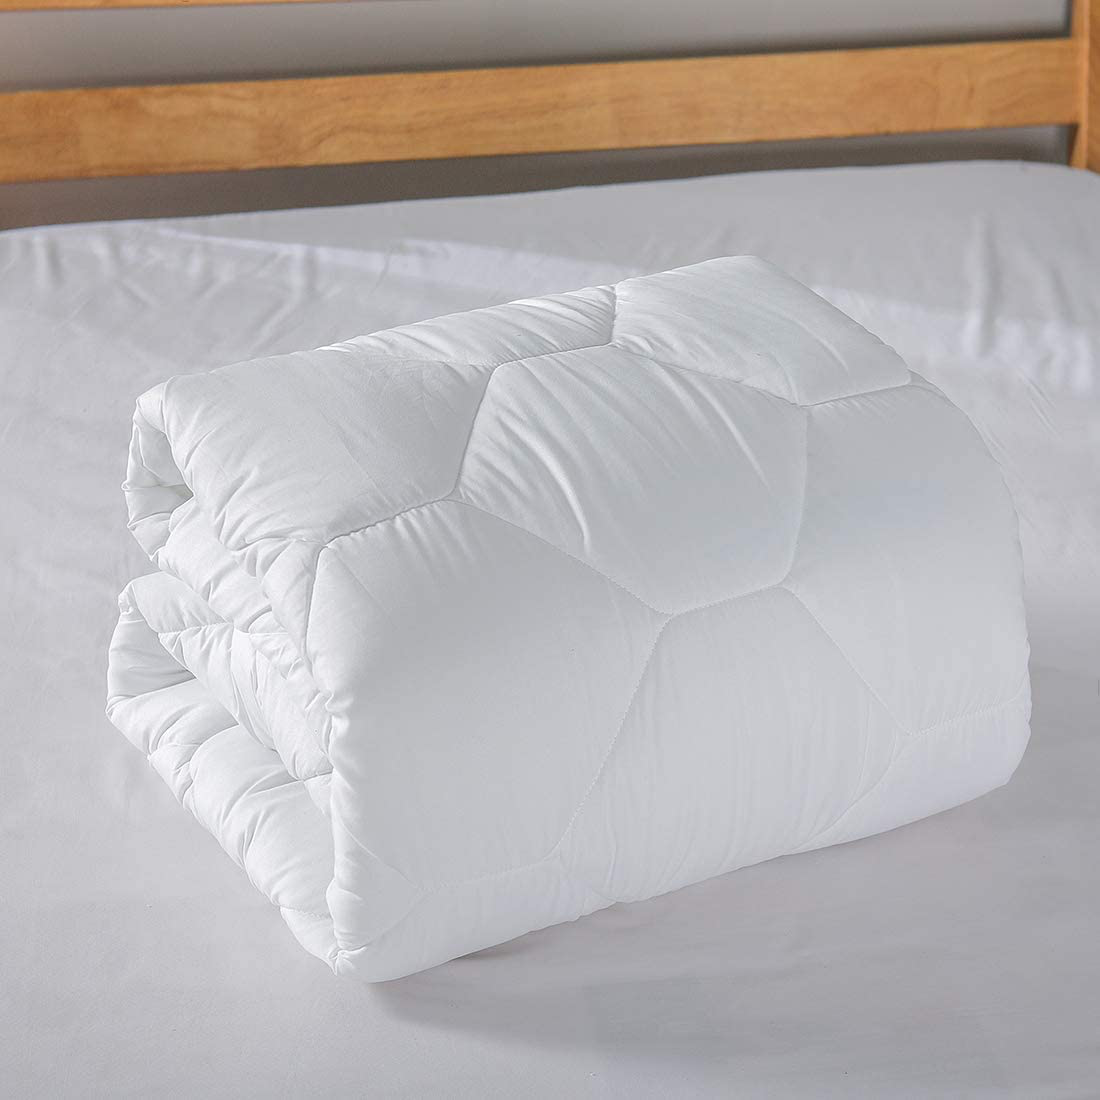 King Mattress Pad, 8-21" Deep Pocket Protector Ultra Soft Quilted Fitted Topper Cover Fit for Dorm Home Hotel -White